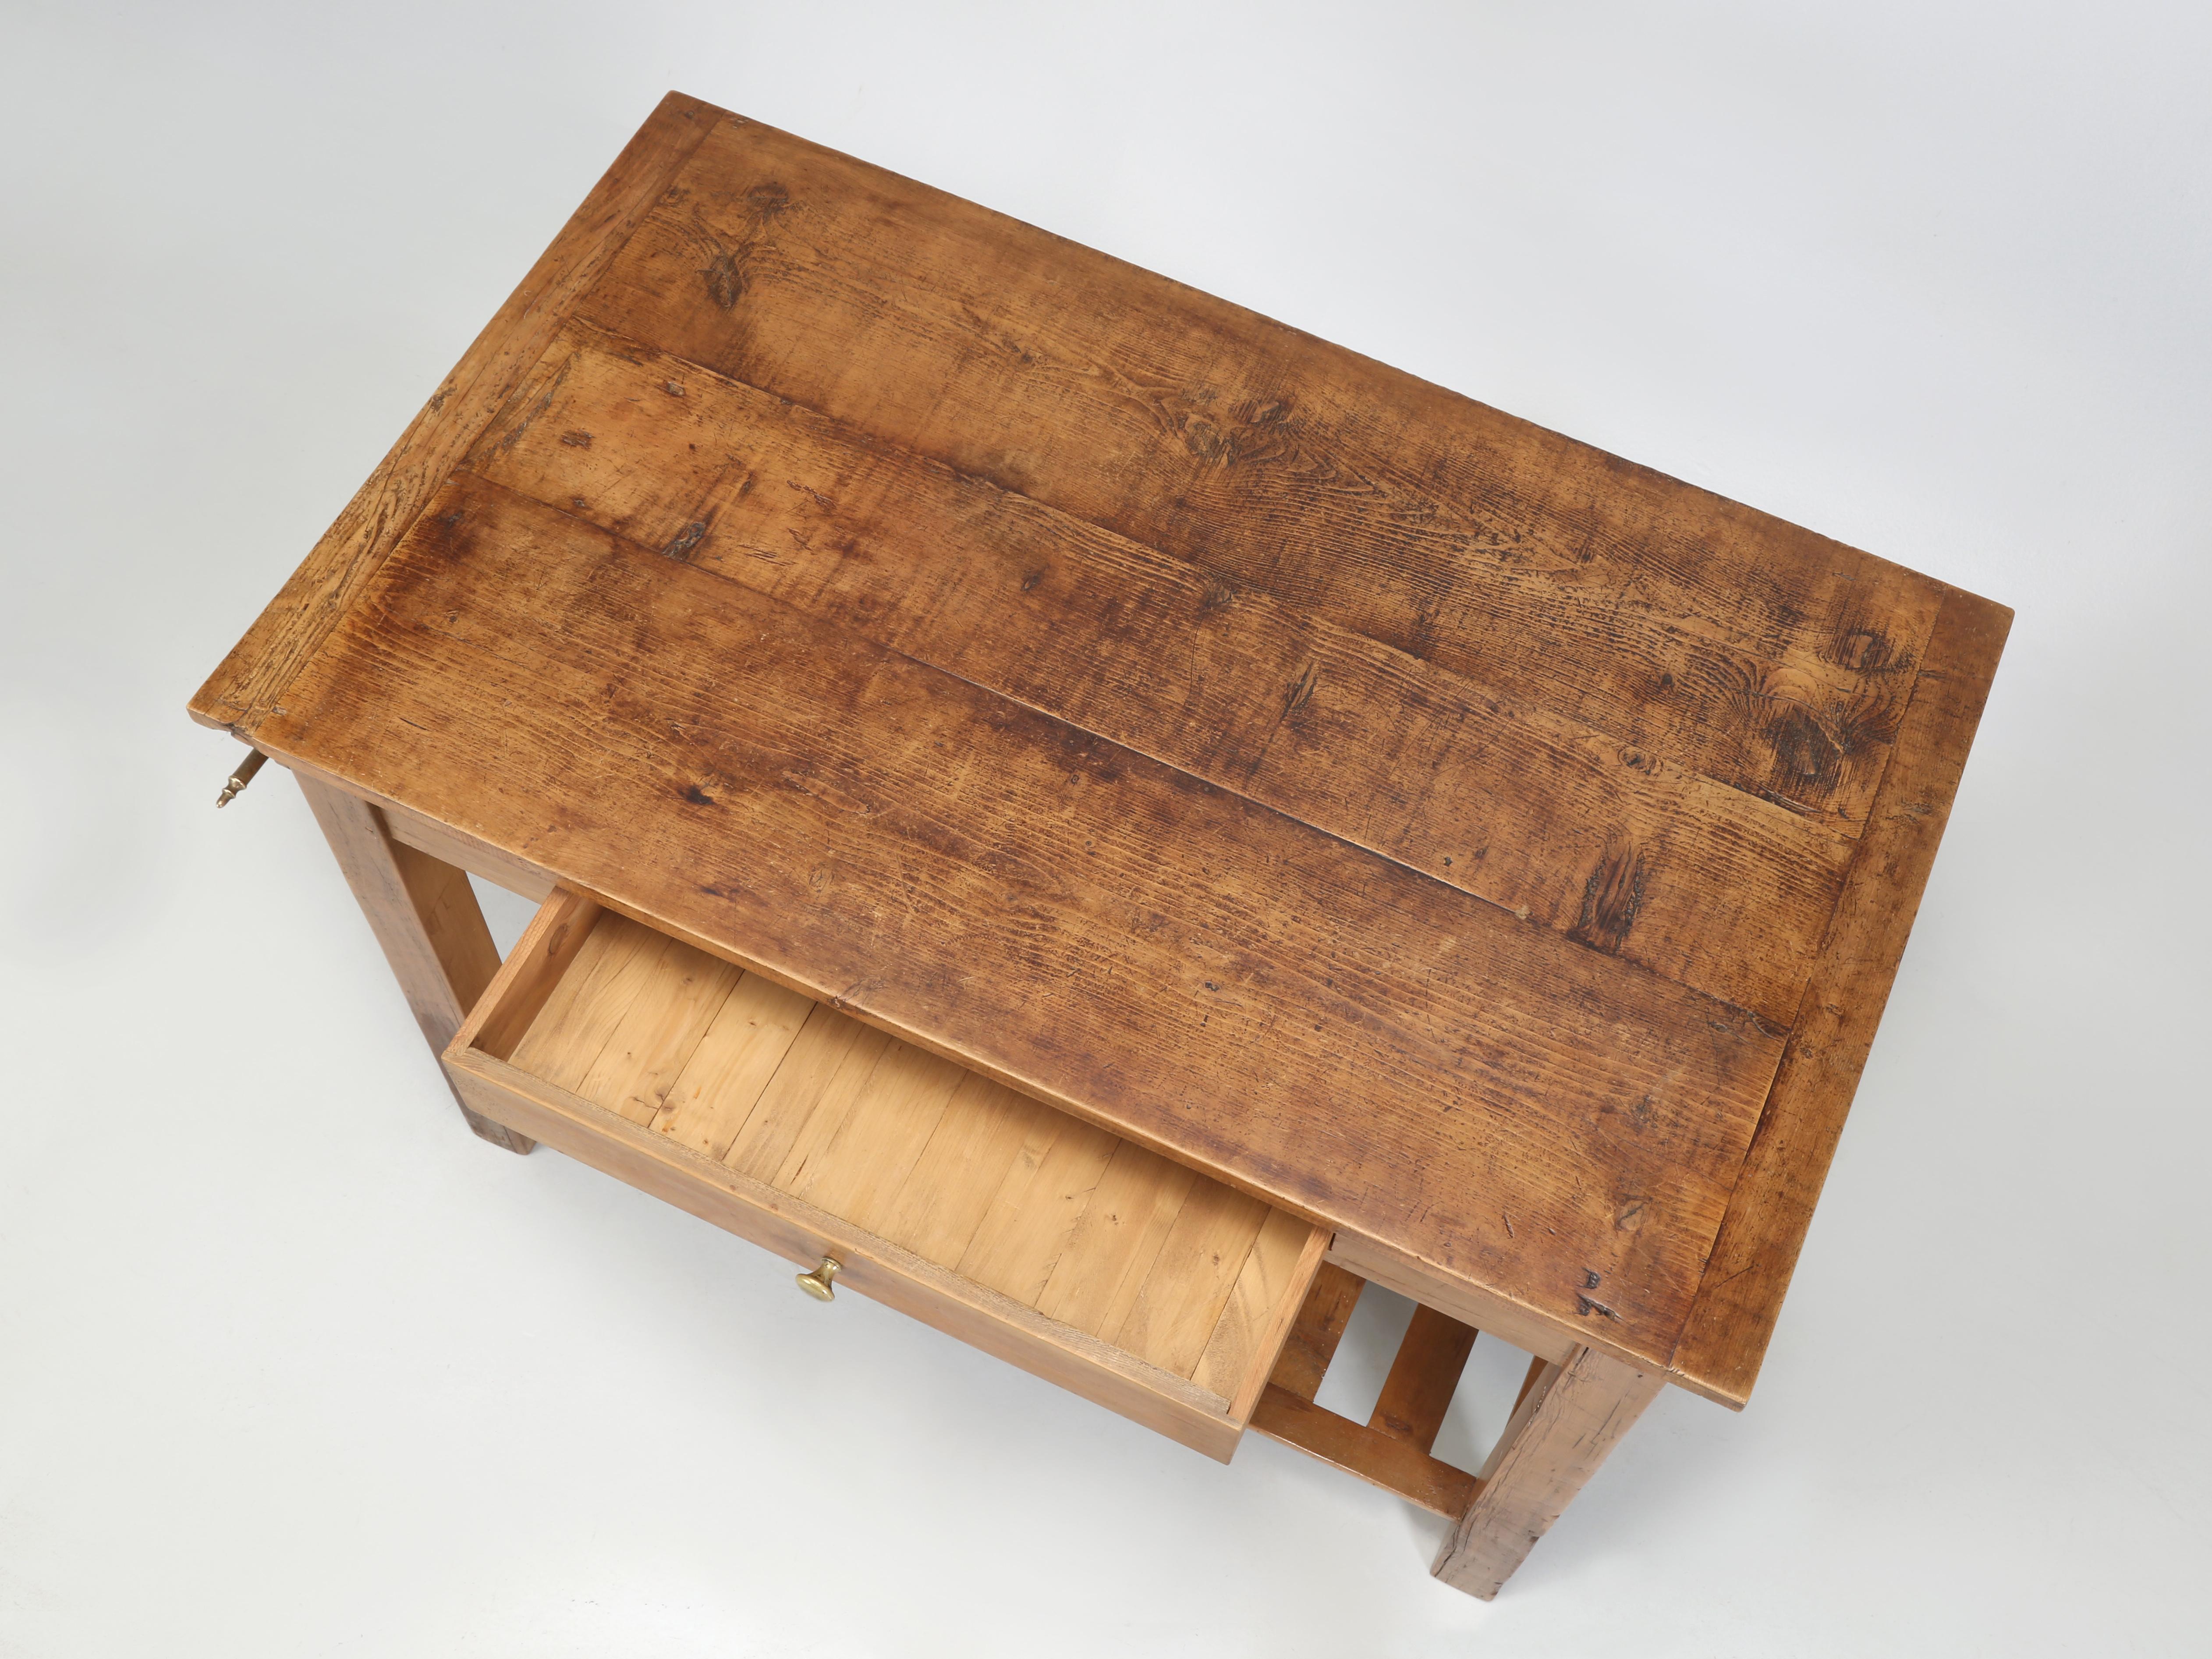 Vintage Pine Kitchen Island that a skilled craftsman with a sharp eye for proportion constructed from Reclaimed Pine lumber. Usually when we run across a Kitchen Island that someone constructed, who is not in the trade, there is always something